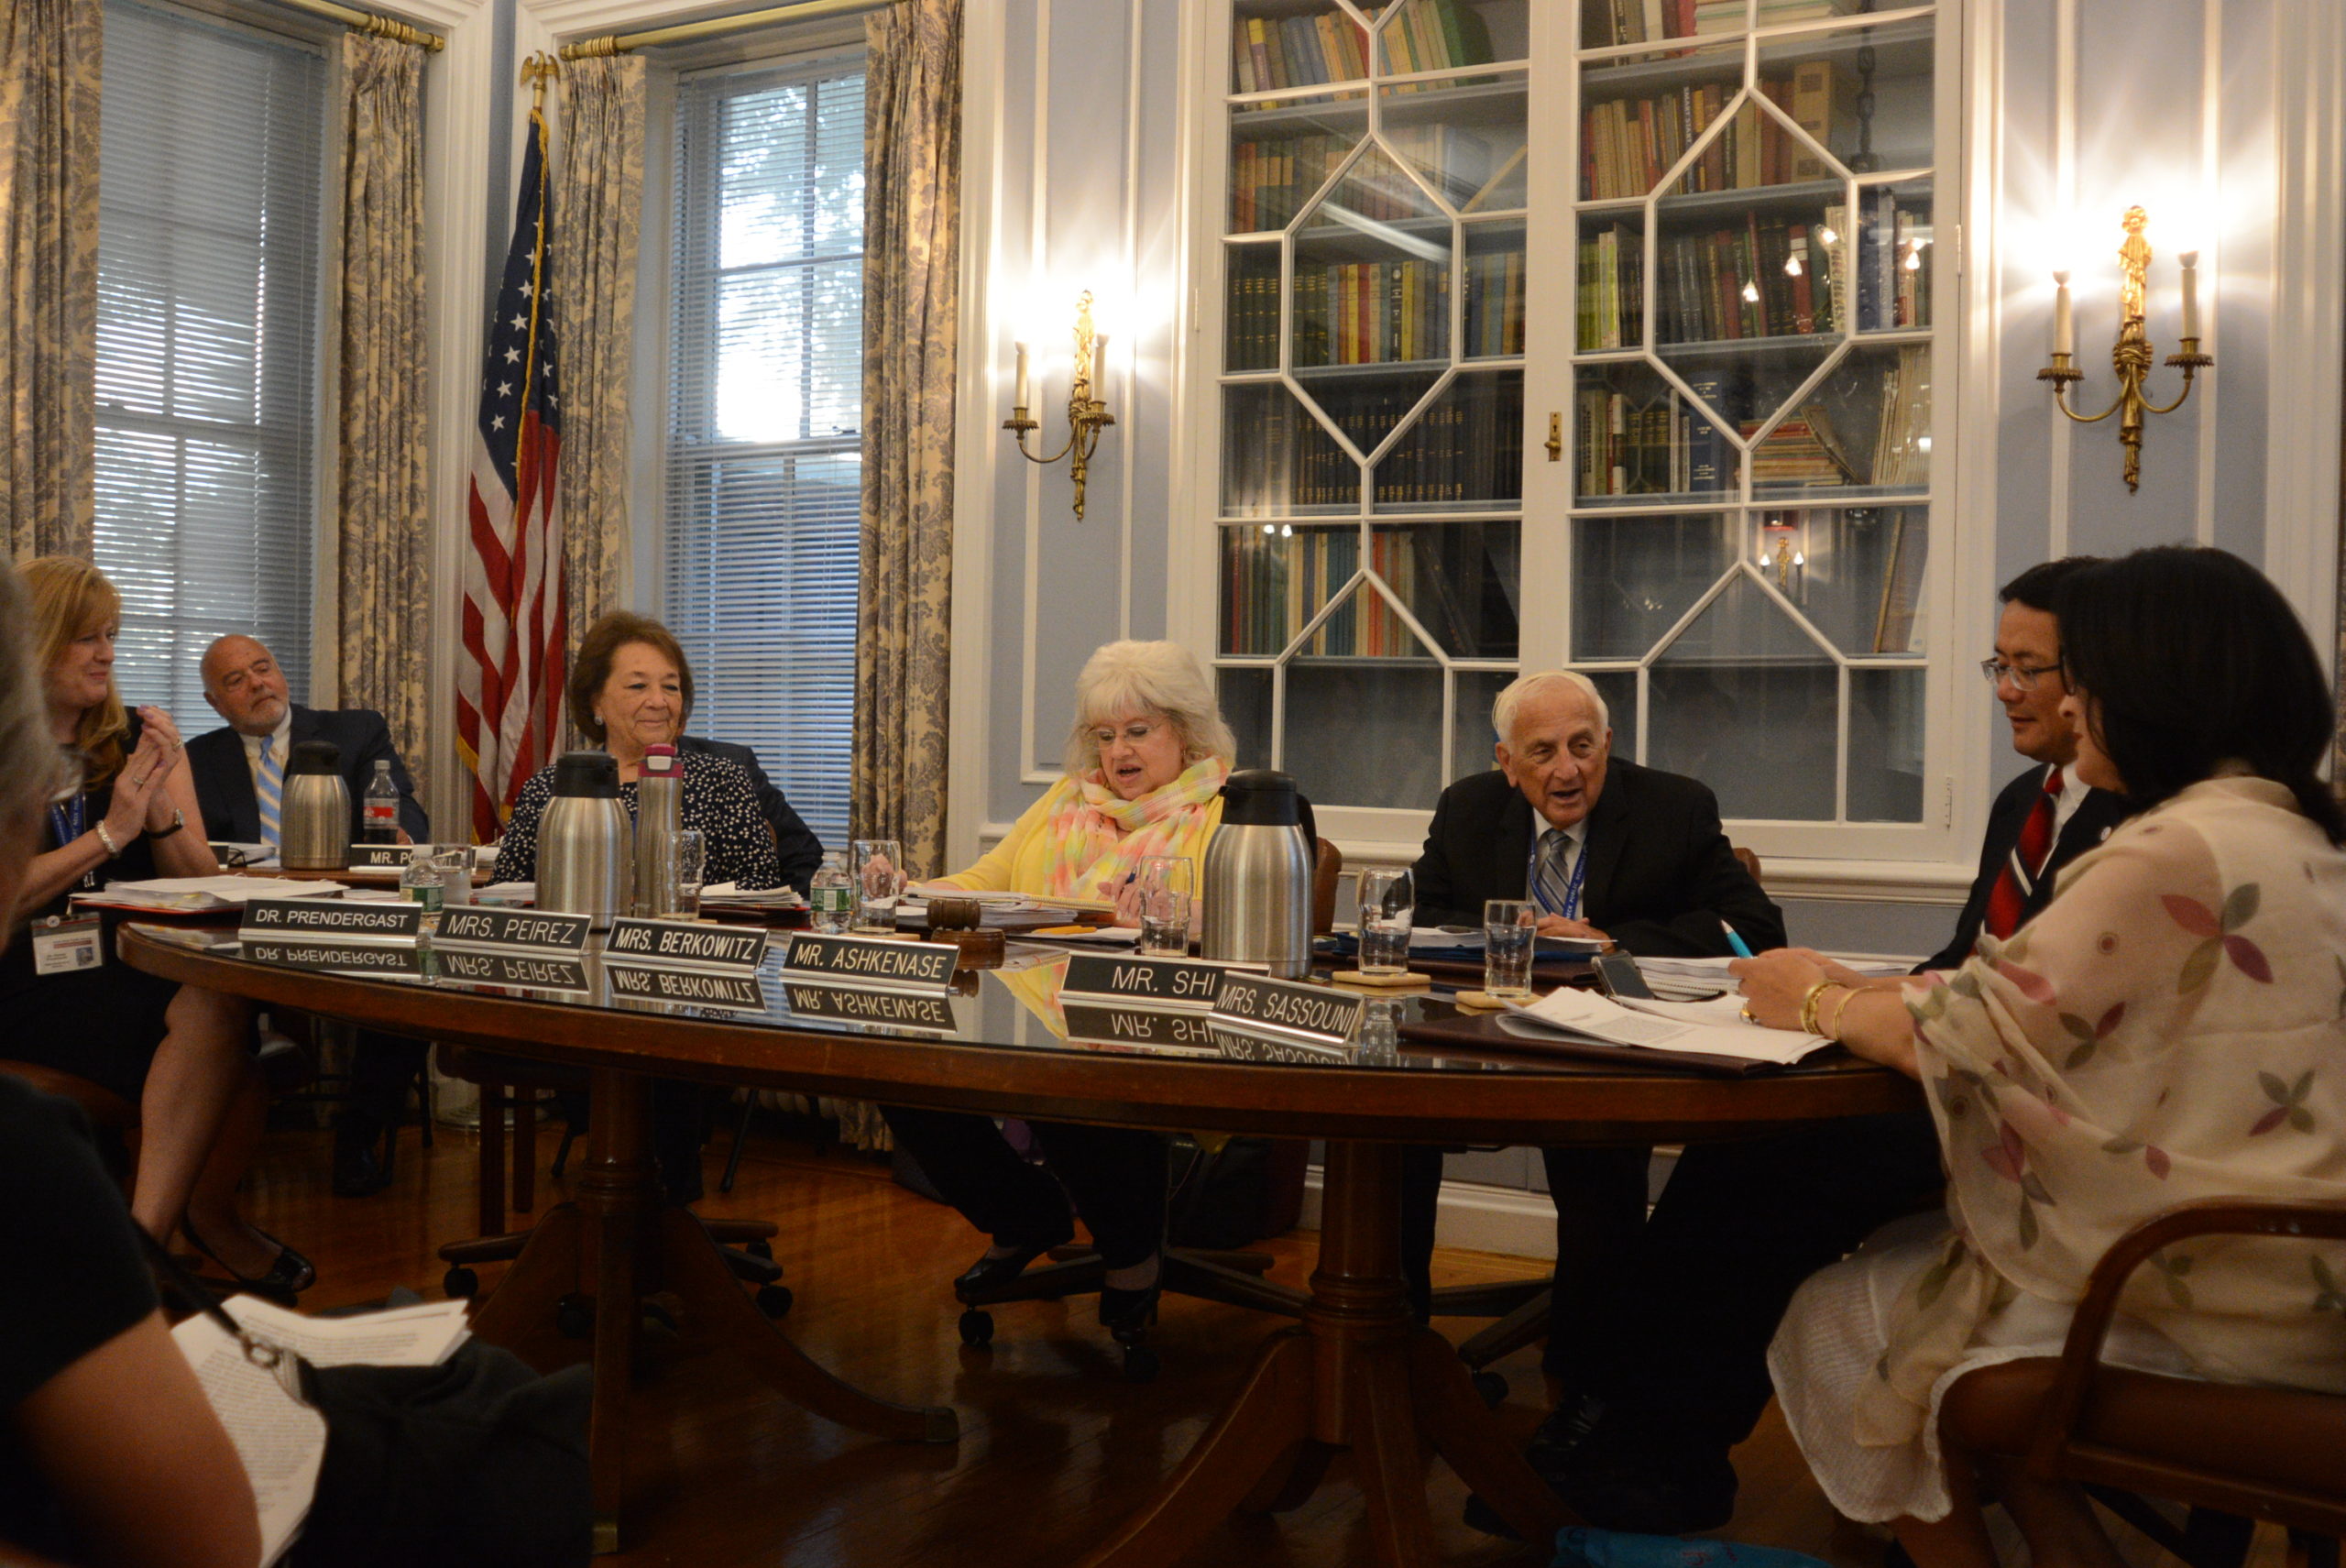 The Great Neck Board of Education took on appointments, retirements, bylaw changes, and the establishment of a memorial fund at its July 1 organizational meeting. (Photo by Janelle Clausen)